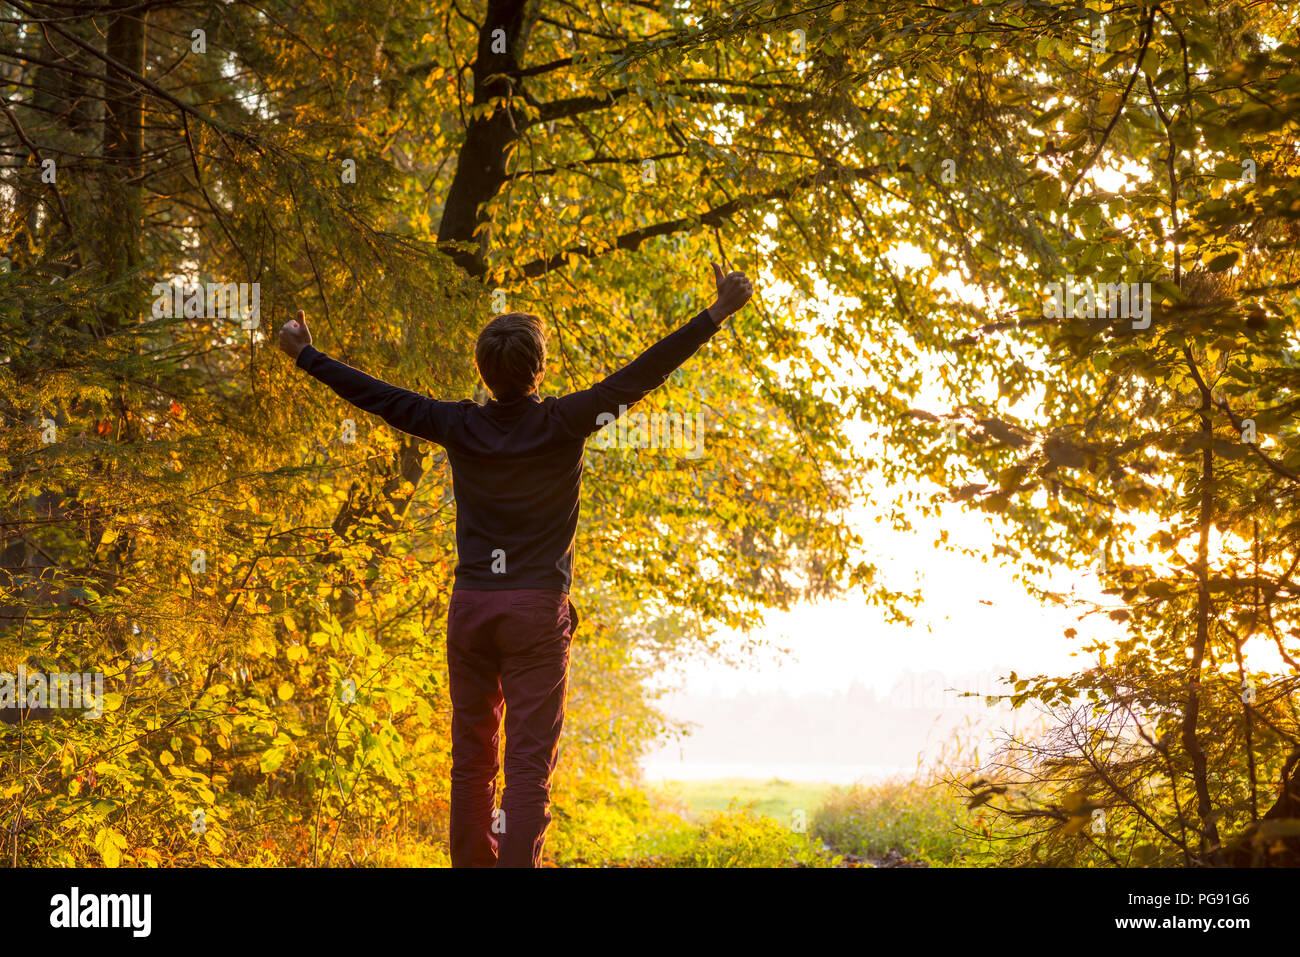 Young man standing on the edge of forested area raising his arms in celebration turned towards a bright sunlight waiting for him just outside the fore Stock Photo